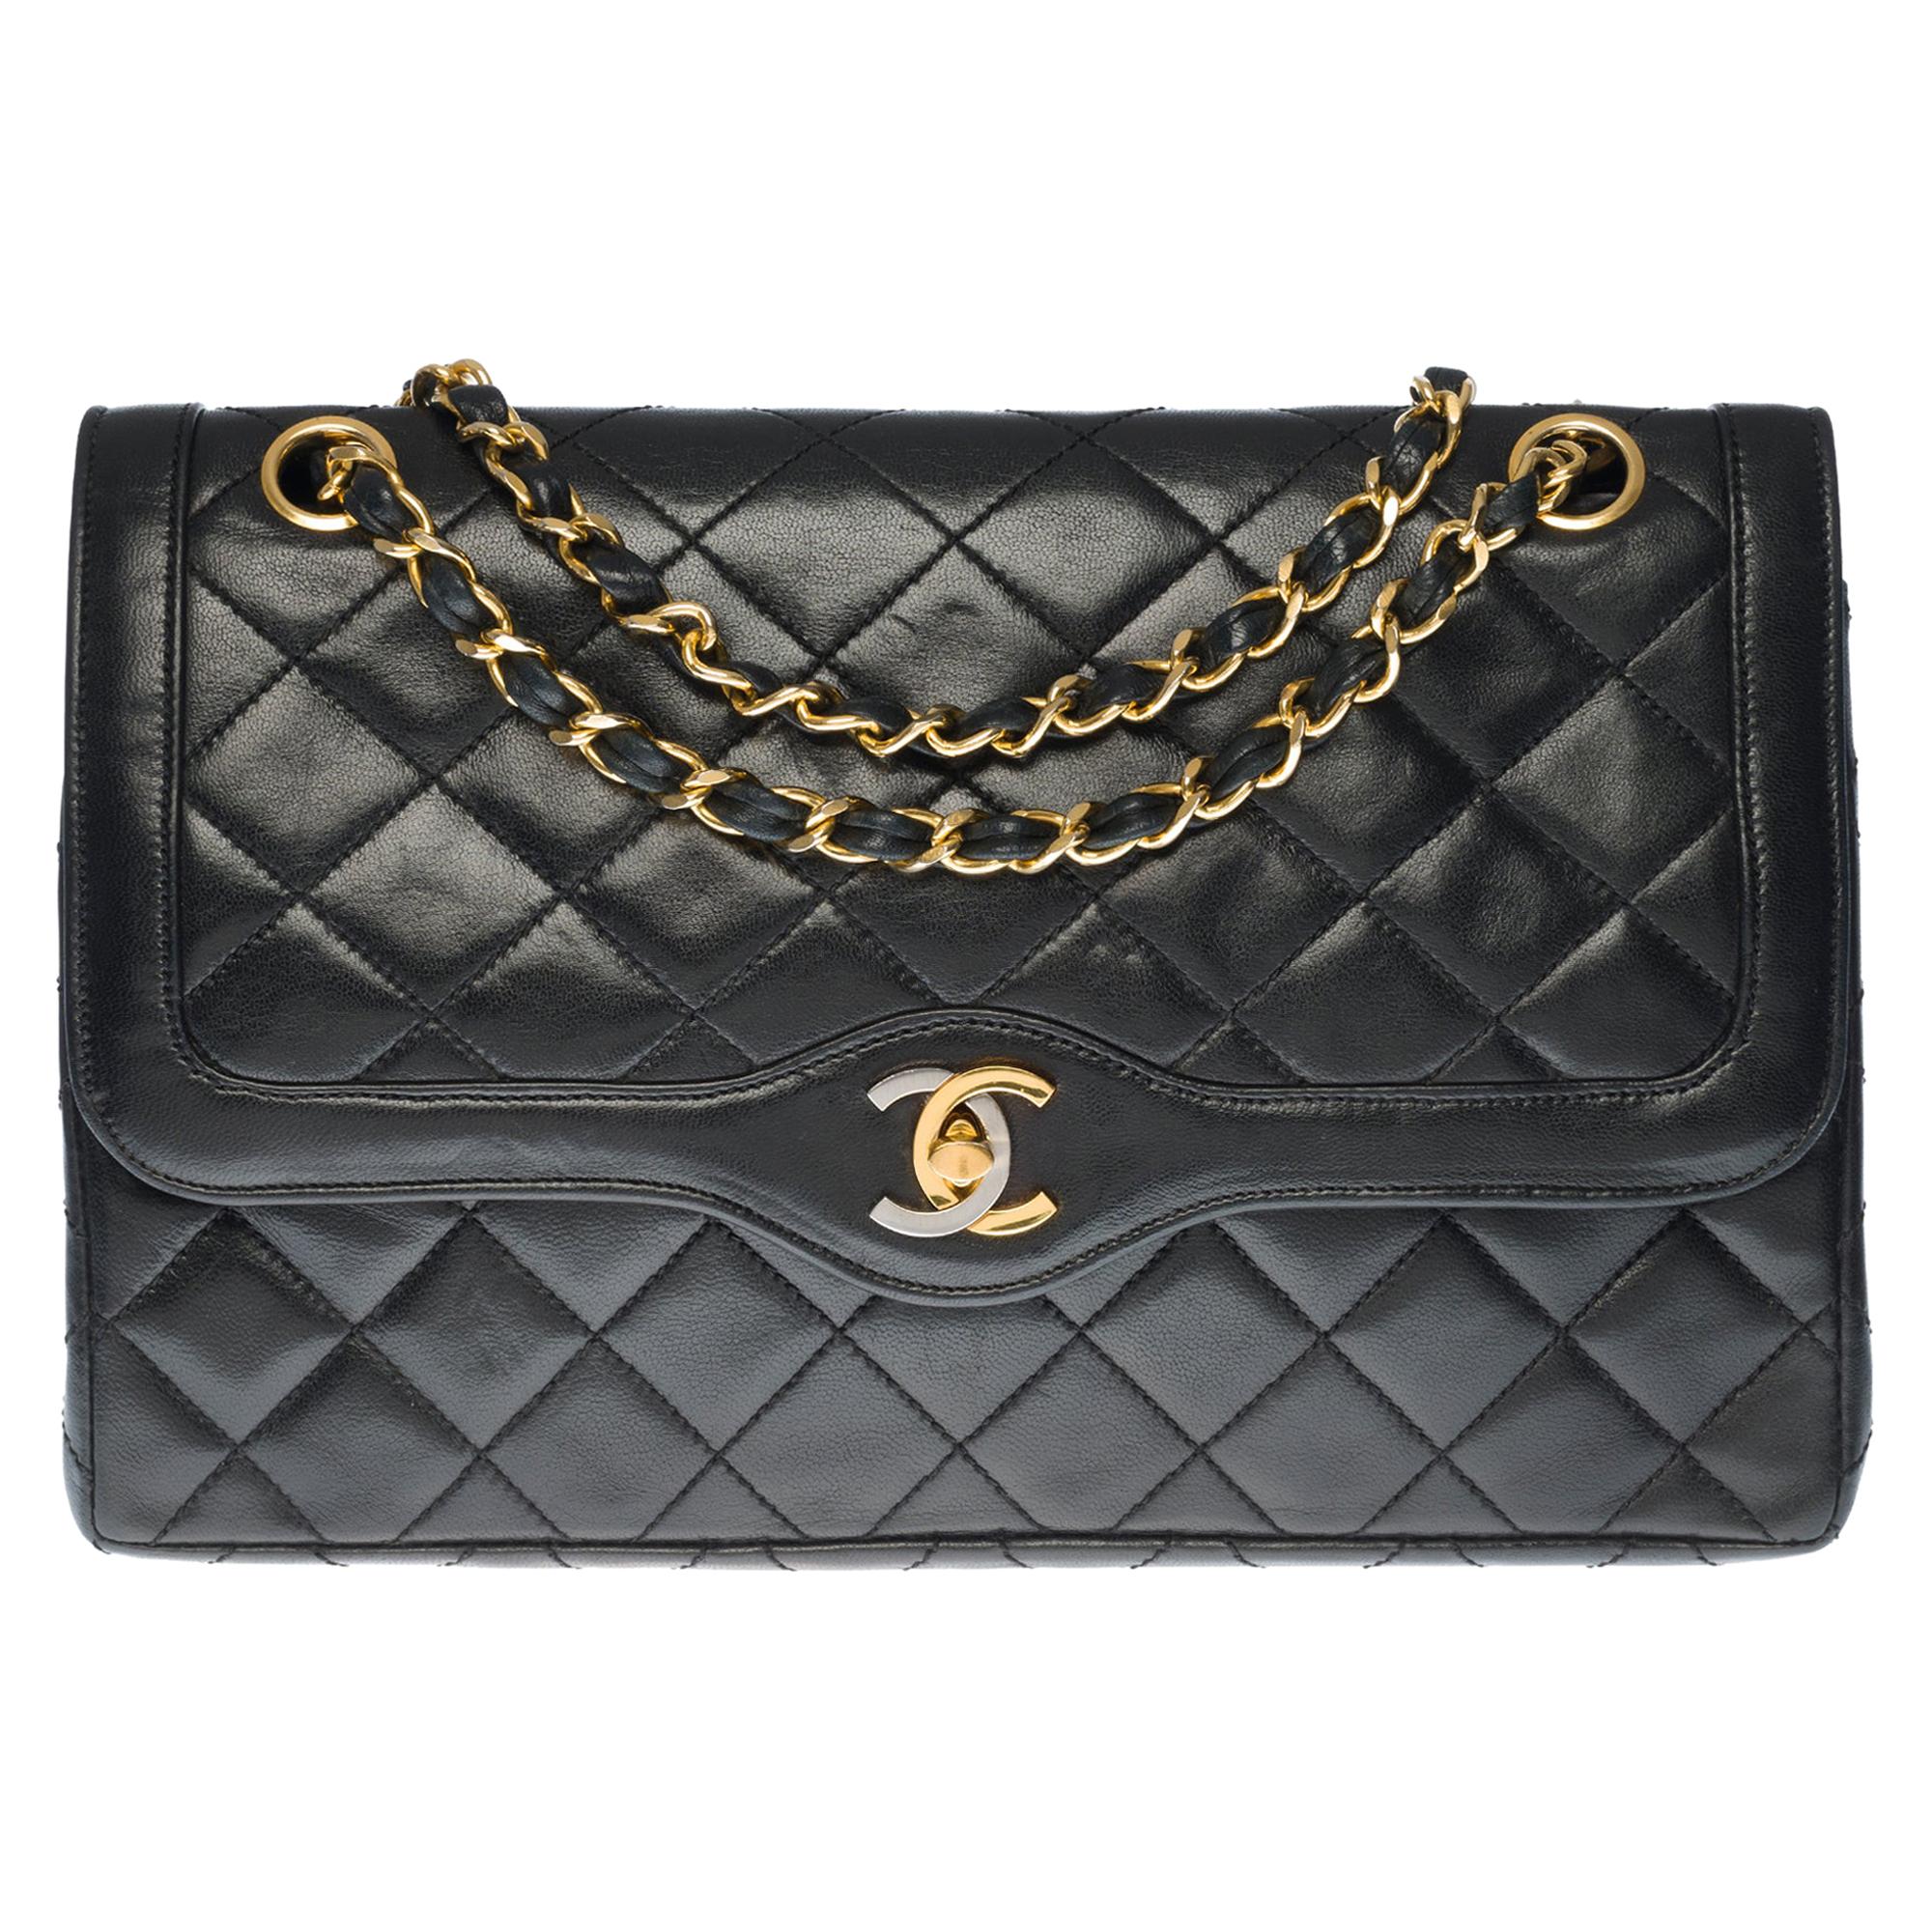 Rare Chanel Classic Double Flap shoulder bag in black quilted leather and GHW